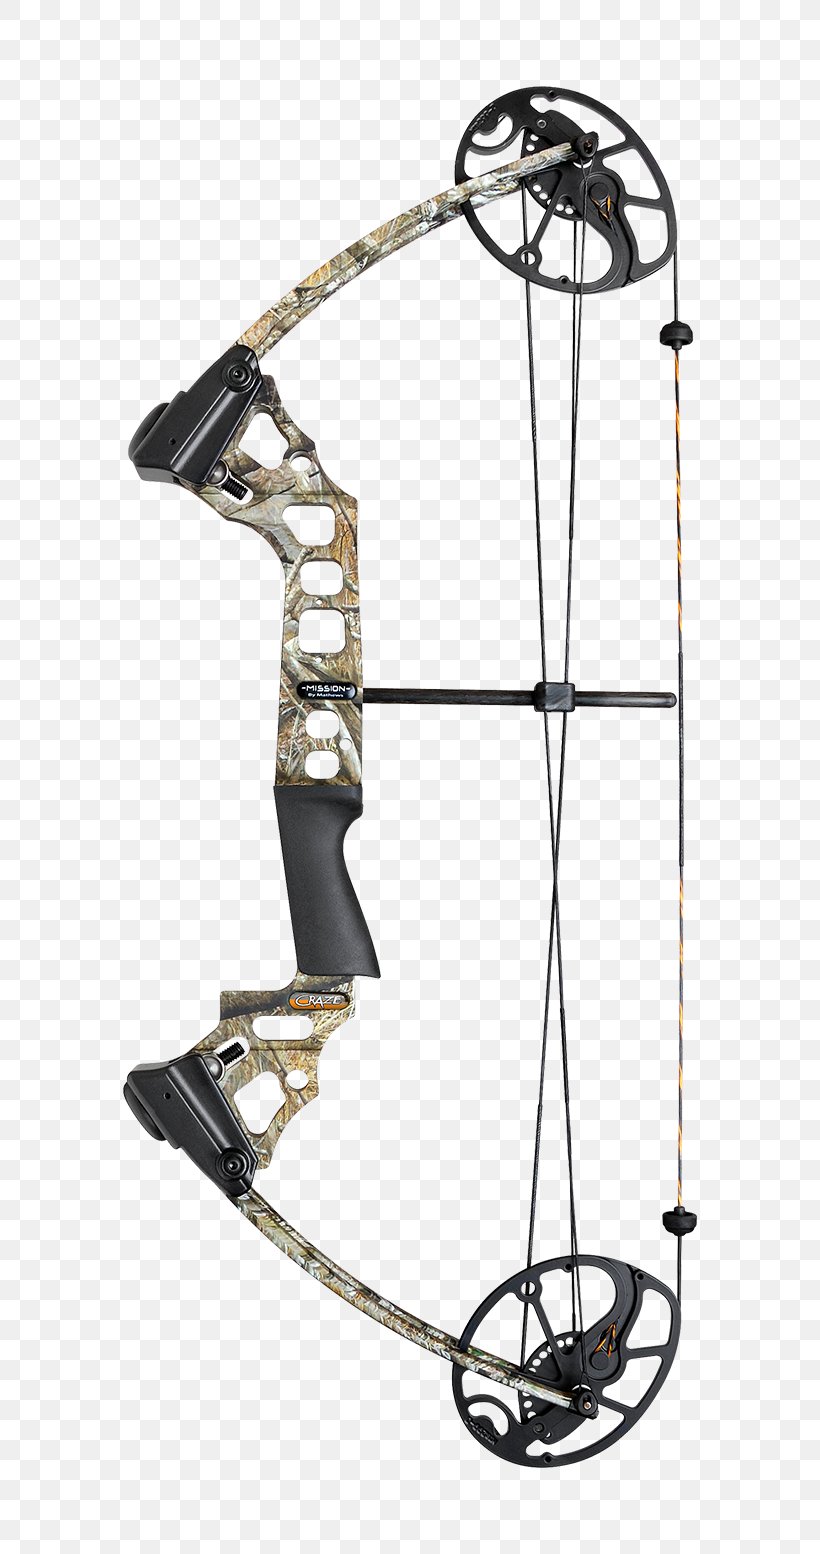 Archery Bowhunting Bow And Arrow Compound Bows, PNG, 812x1554px, Archery, Bit, Bow, Bow And Arrow, Bowhunting Download Free